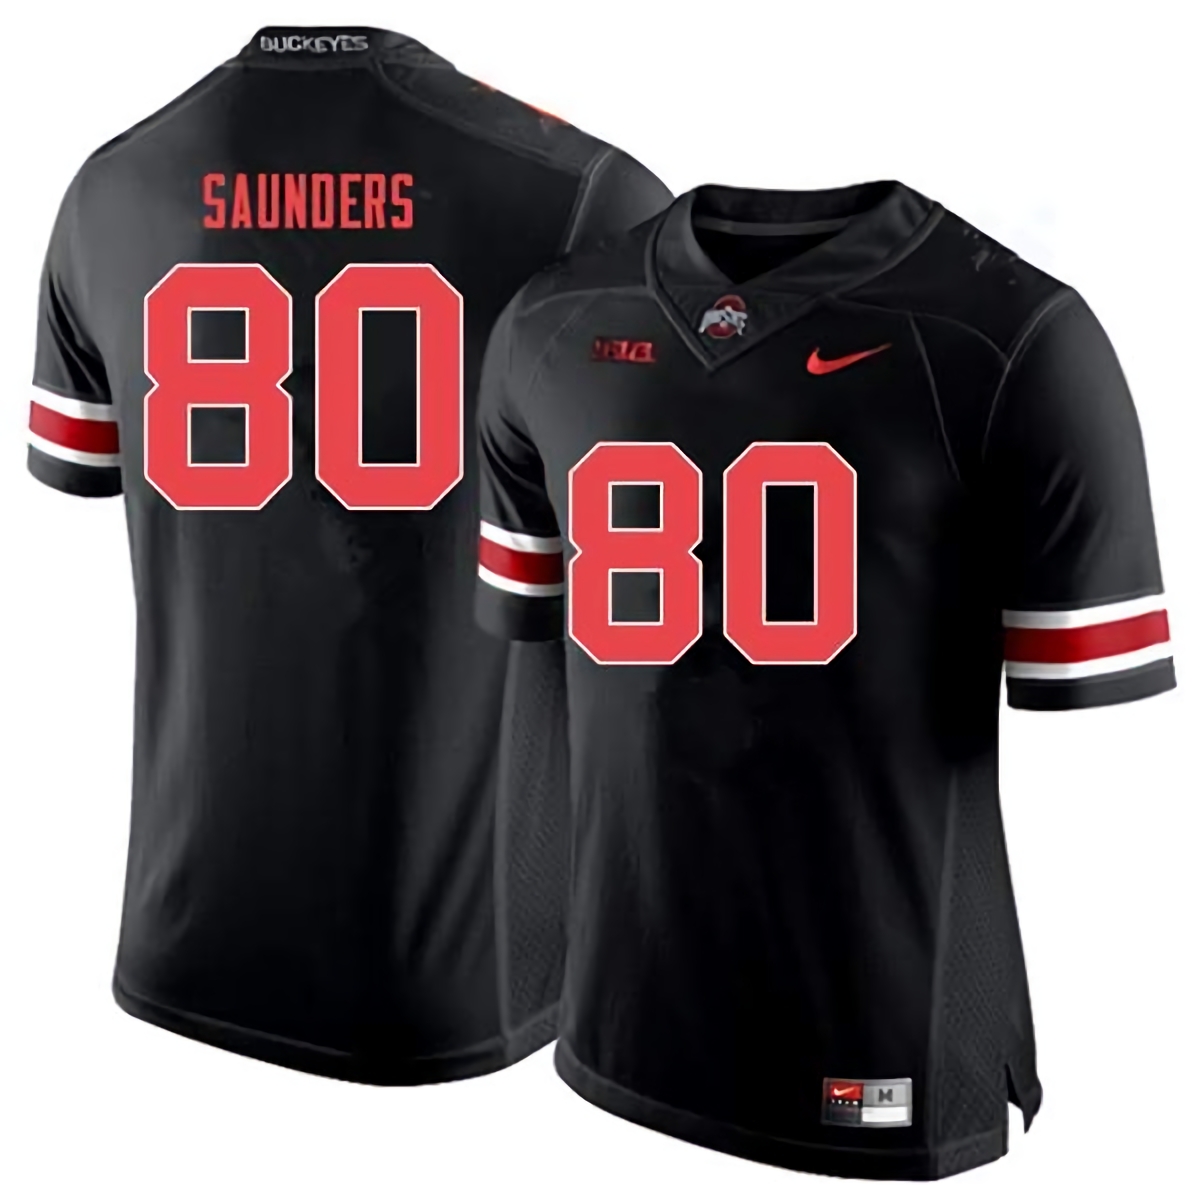 C.J. Saunders Ohio State Buckeyes Men's NCAA #80 Nike Black Out College Stitched Football Jersey LAT5256UI